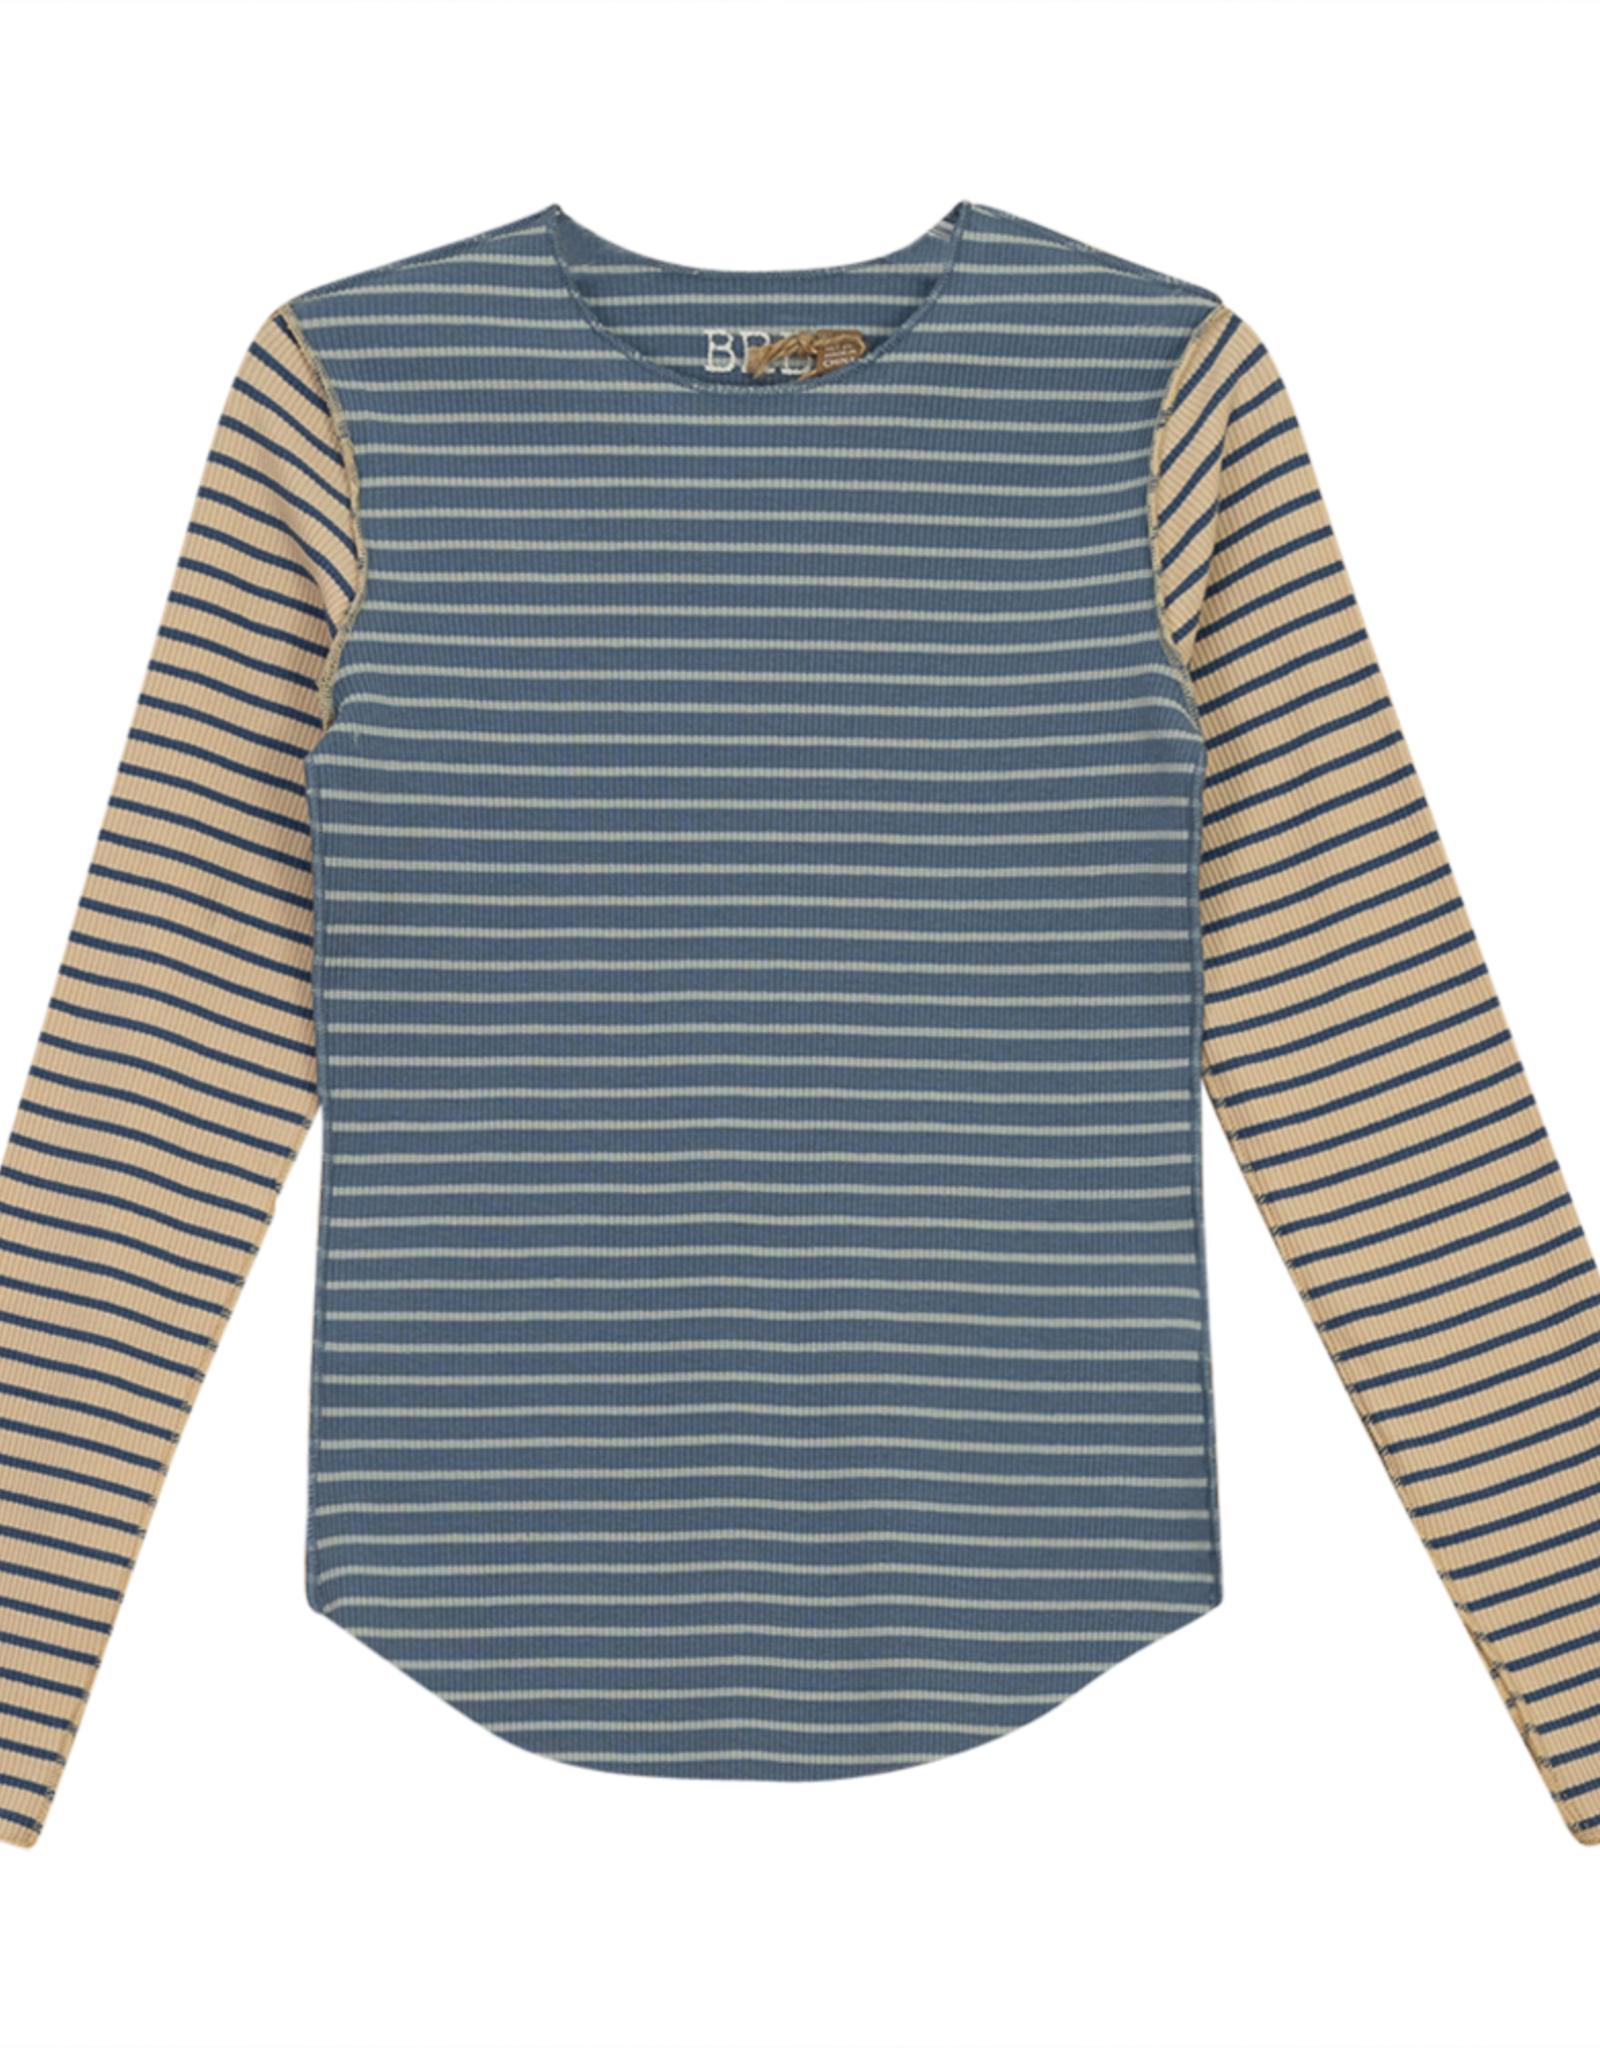 BRB BRB Two Tone Stripe Long Sleeve Top